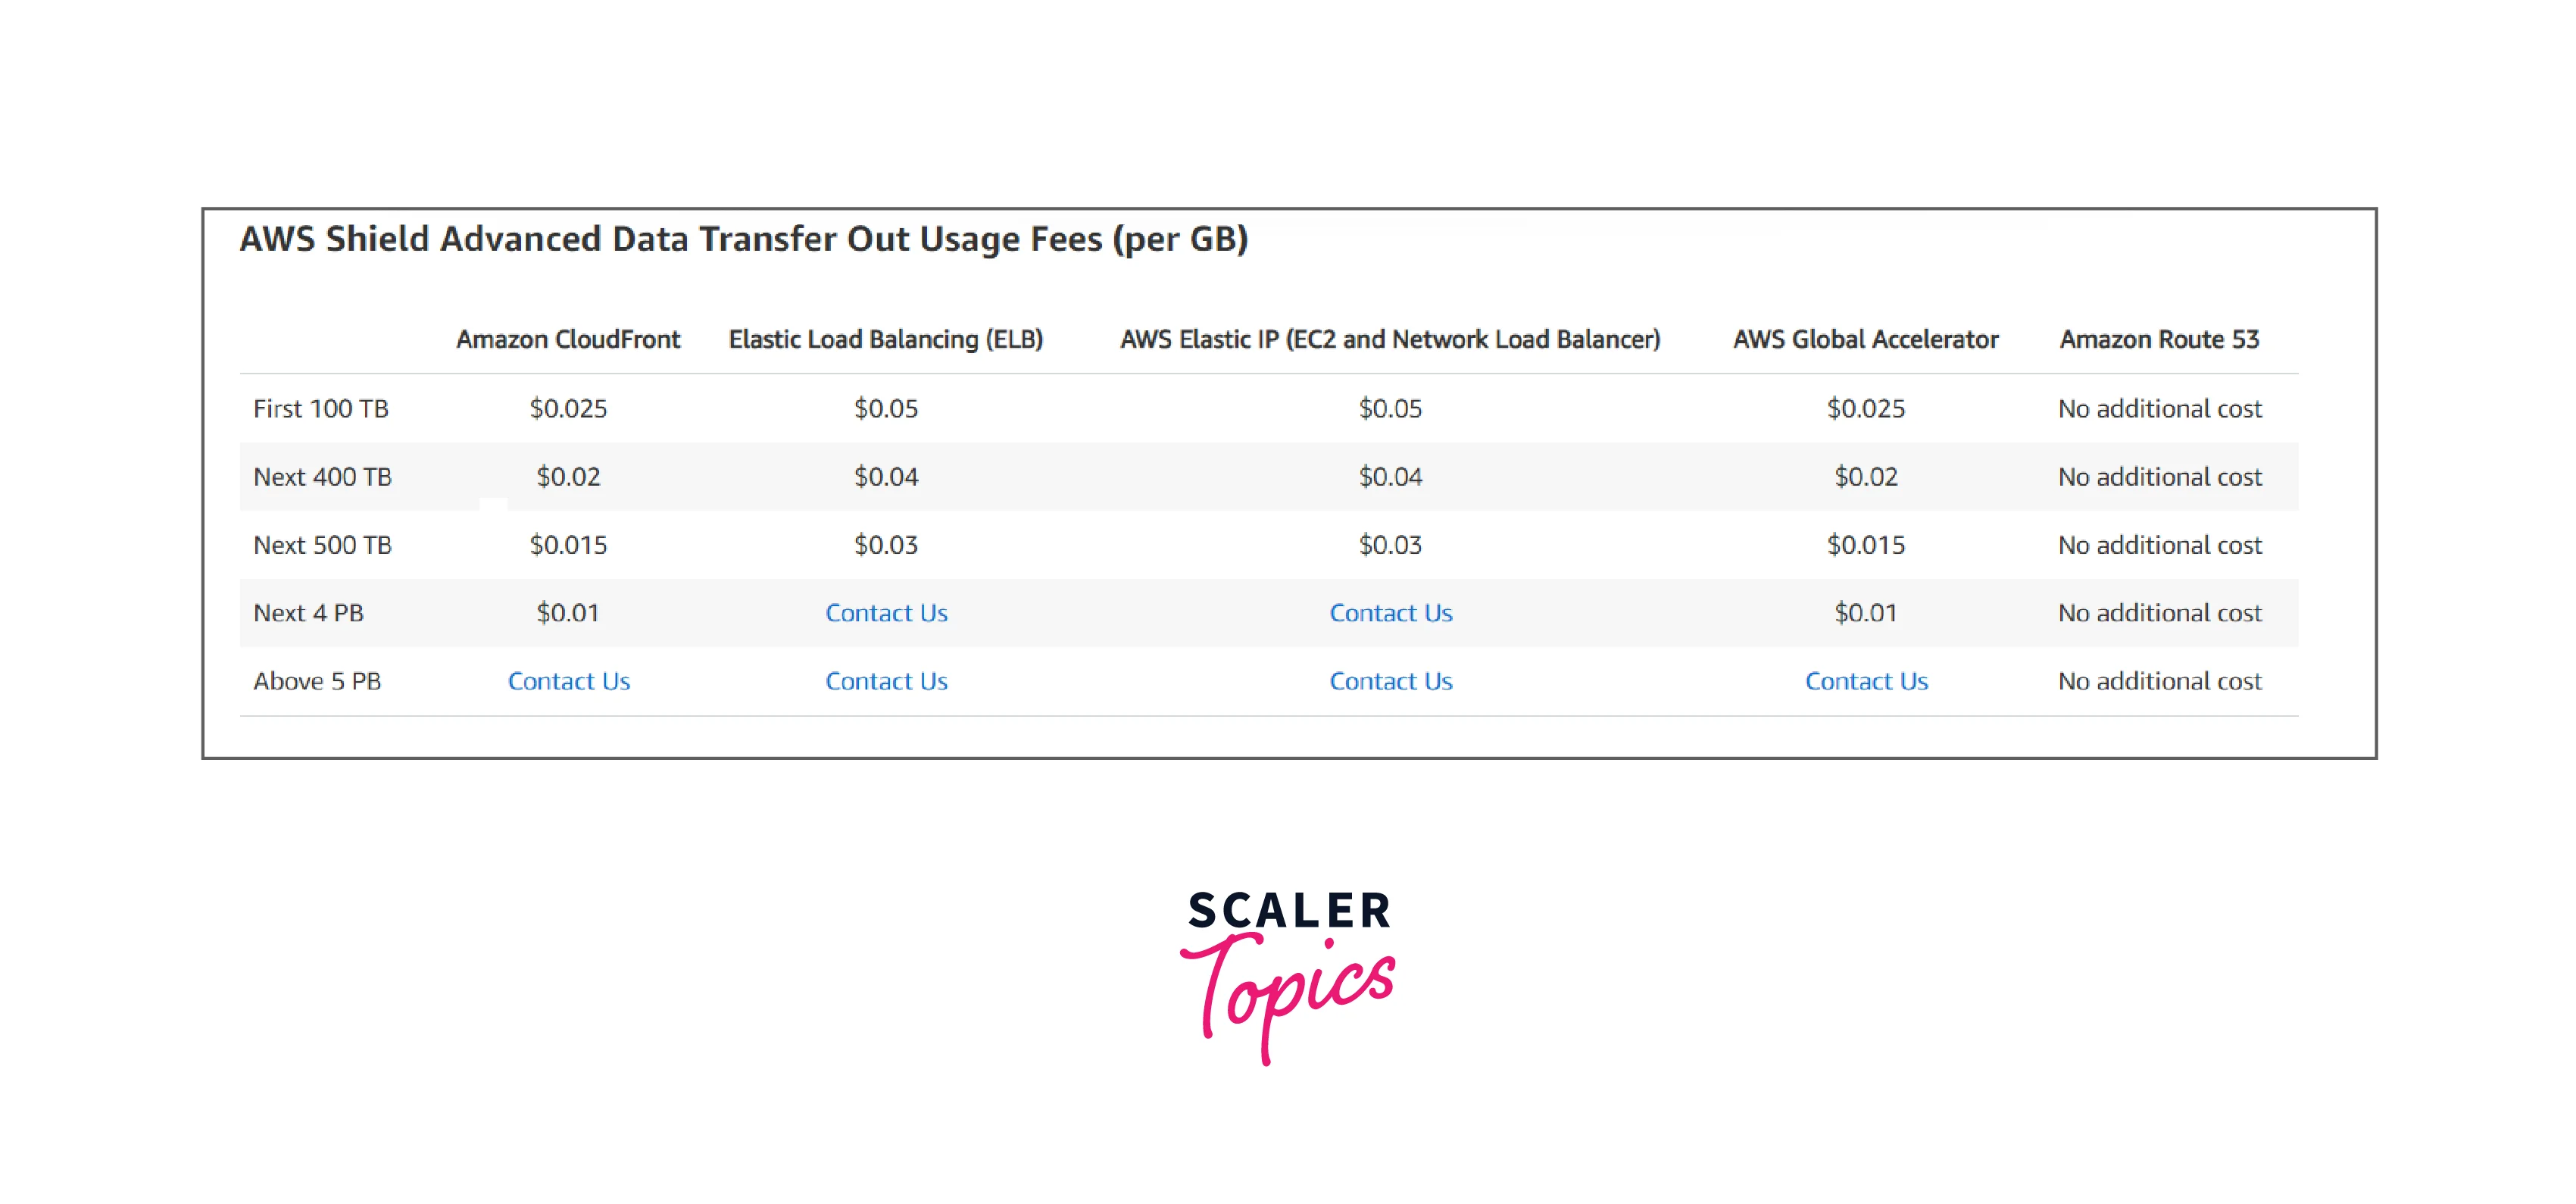 pricing-details-related-to-out-data-transfer